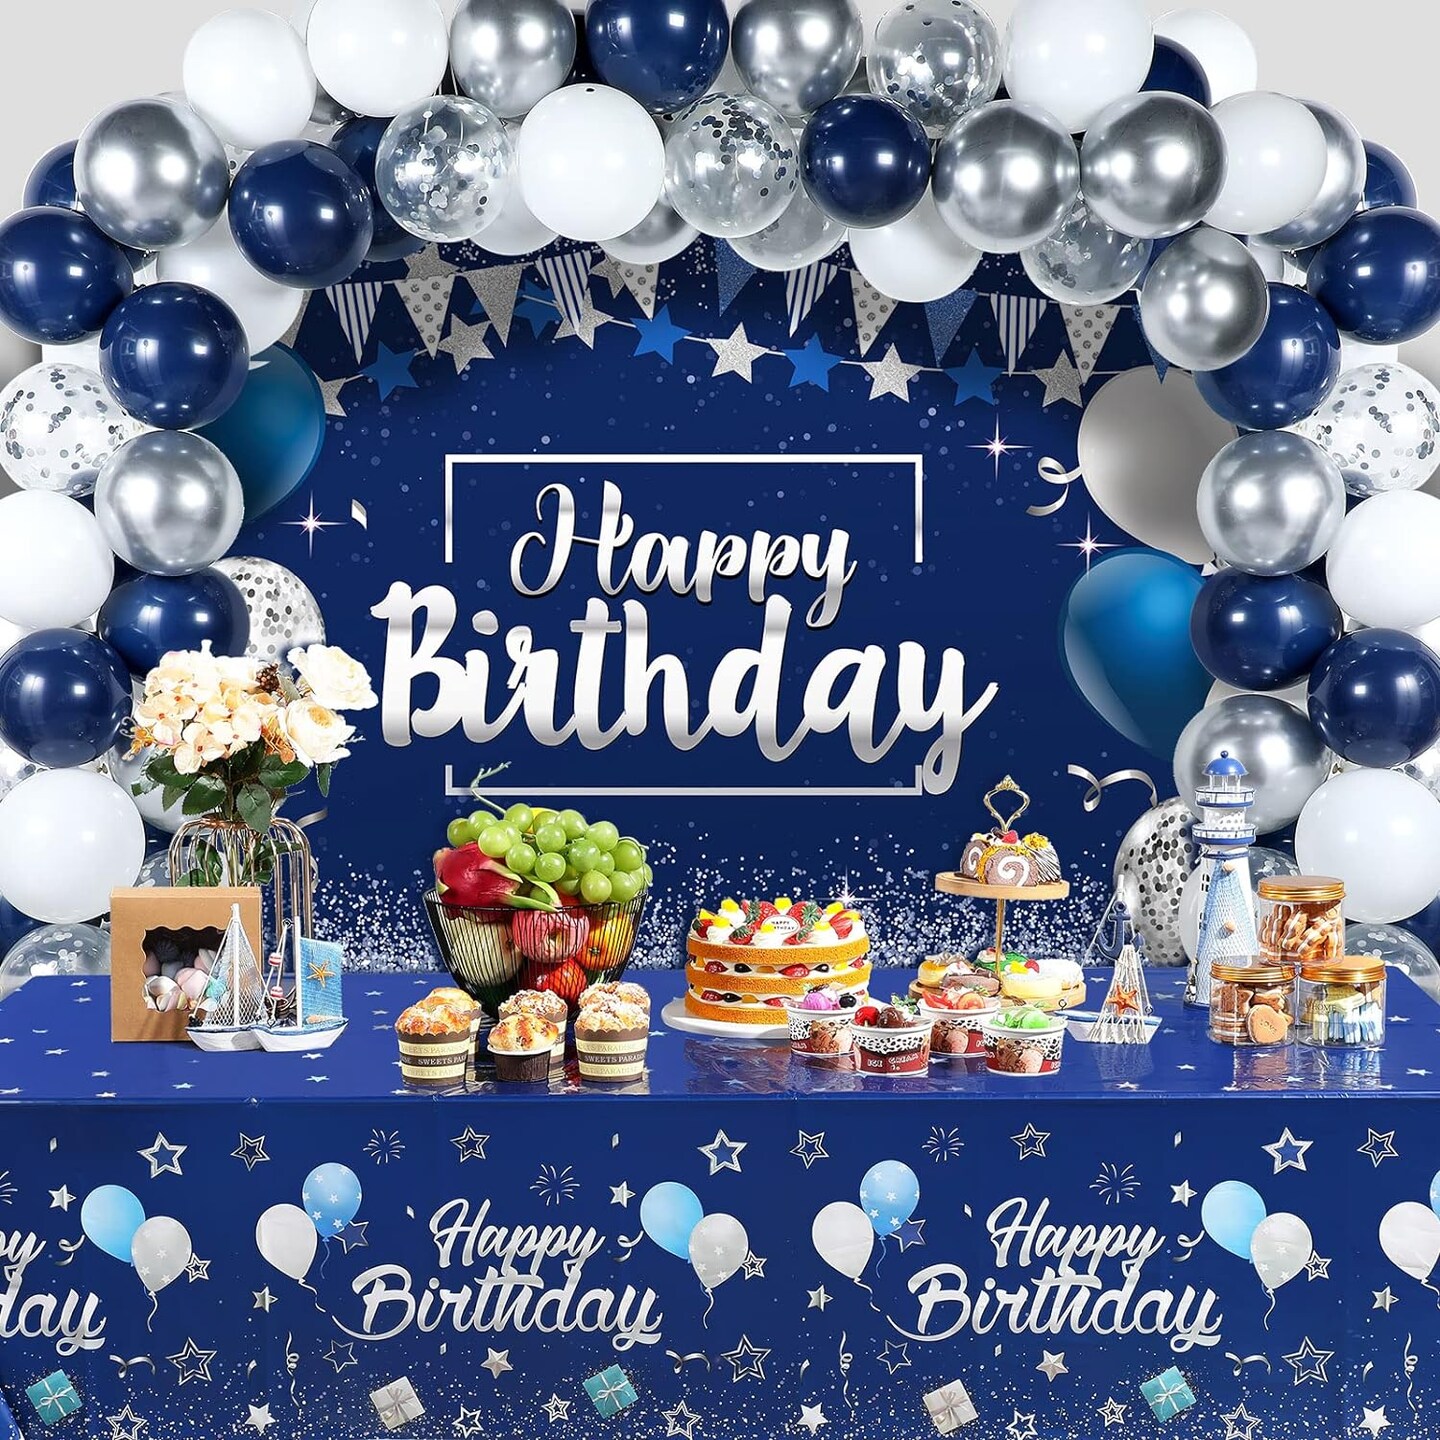 Navy Blue Birthday Party Decorations Blue Confetti Balloons Kit Happy Birthday Photography Backdrop Banner Tablecloths for Boys Girls Men Women Birthday Party Supplies Decor (Navy Blue and Silver)